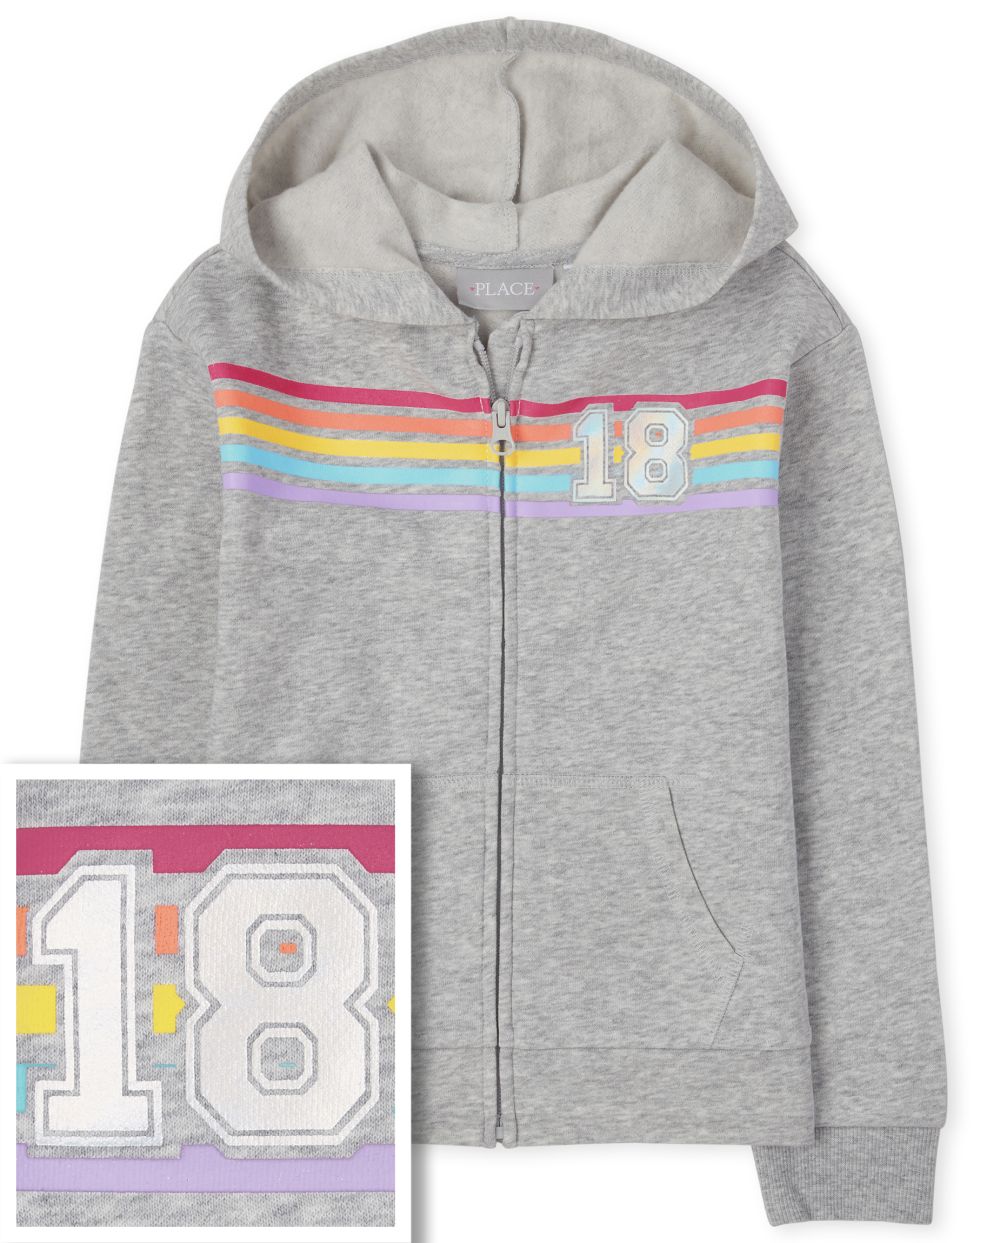 

Girls French Terry Zip Up Hoodie - Gray - The Children's Place